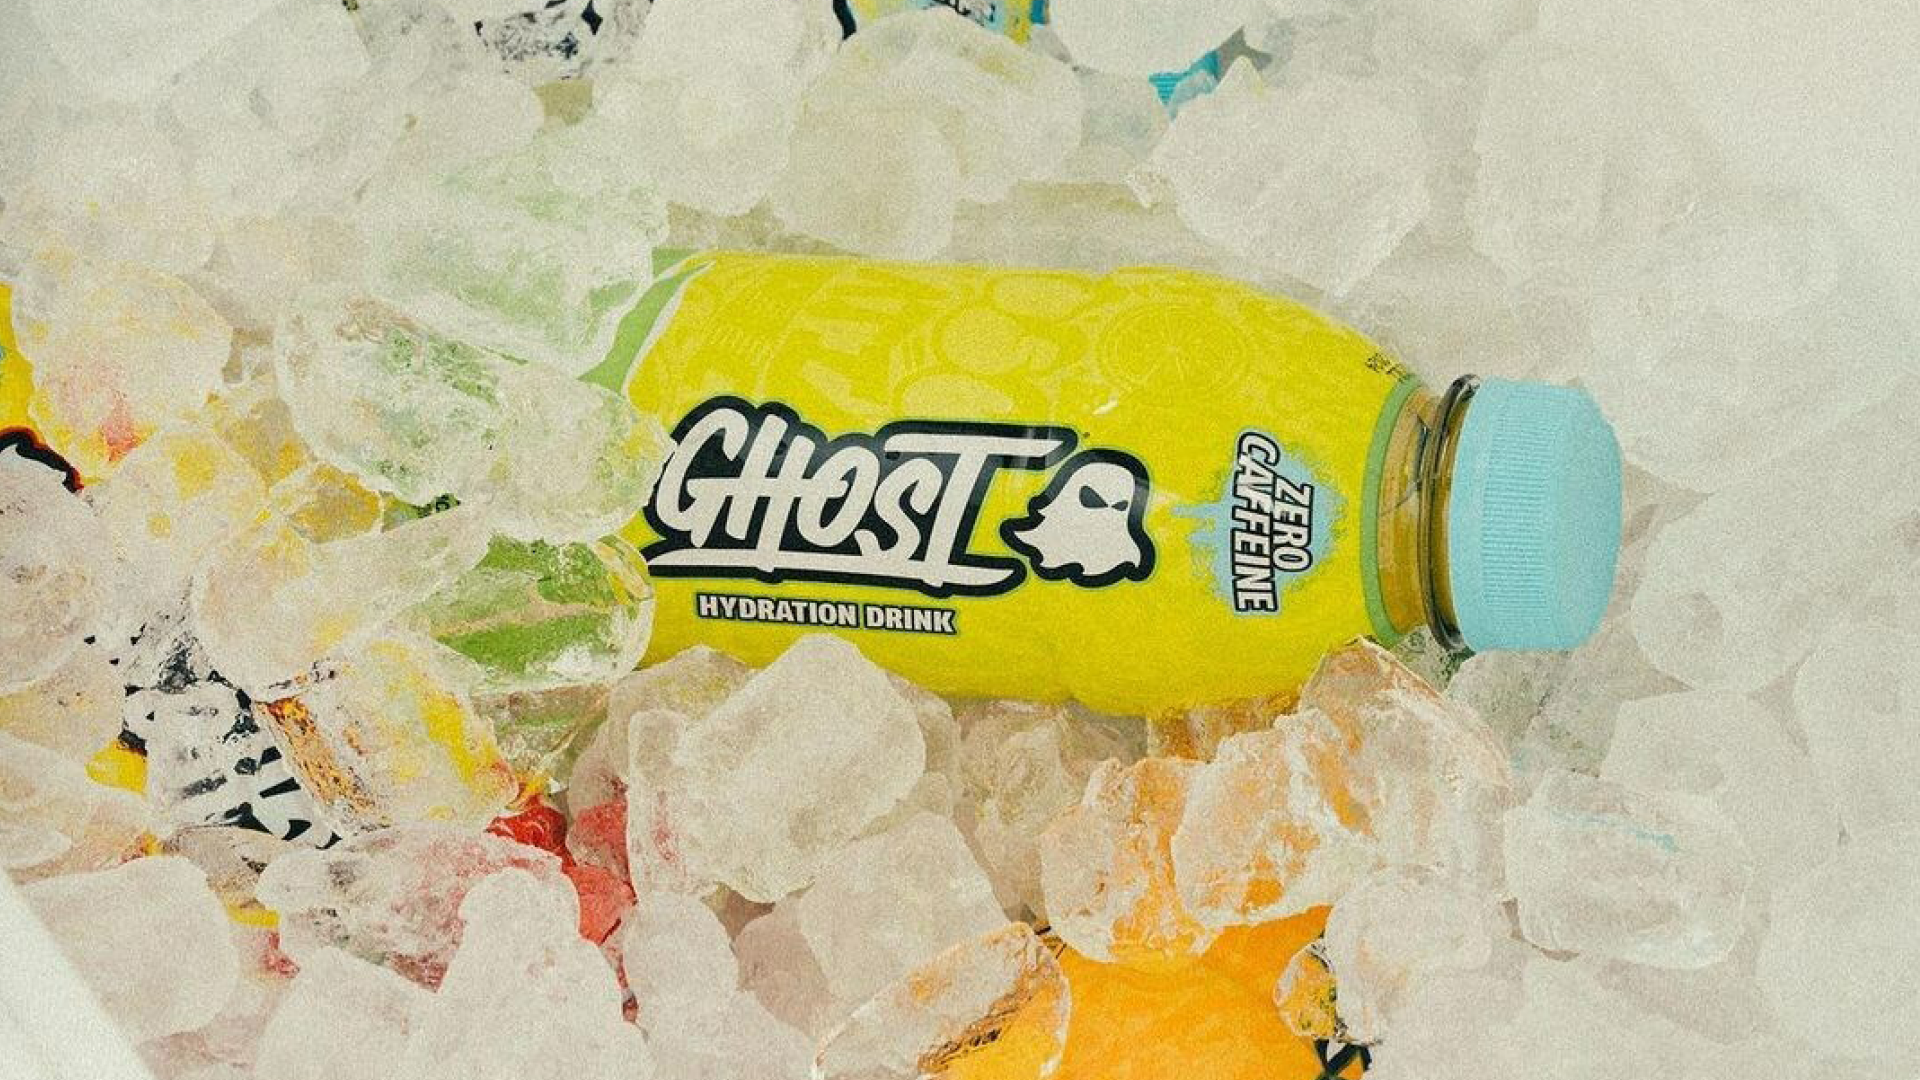 GHOST Releases First Licensed Ready-to-Drink Hydration Product